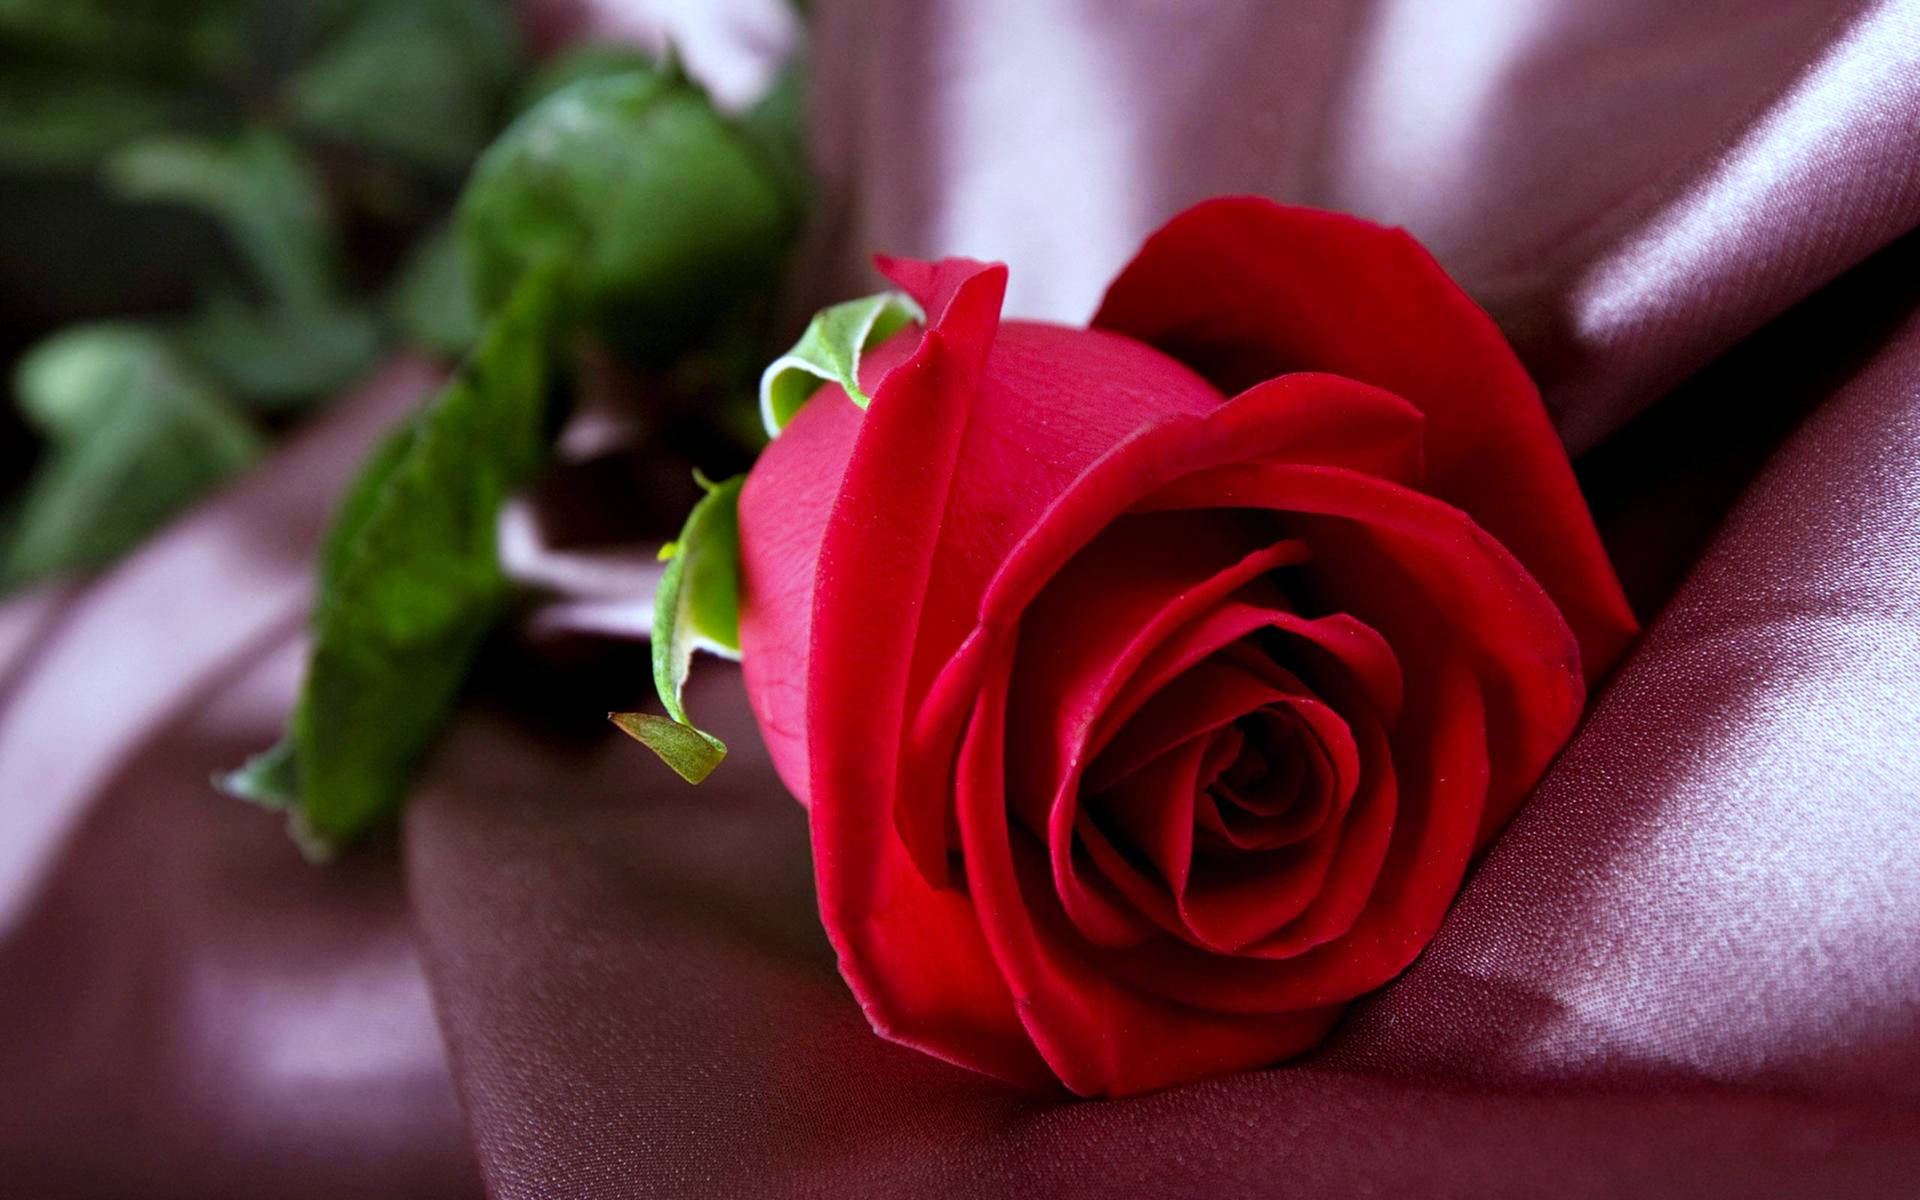 Red Rose On Fabric Wallpaper